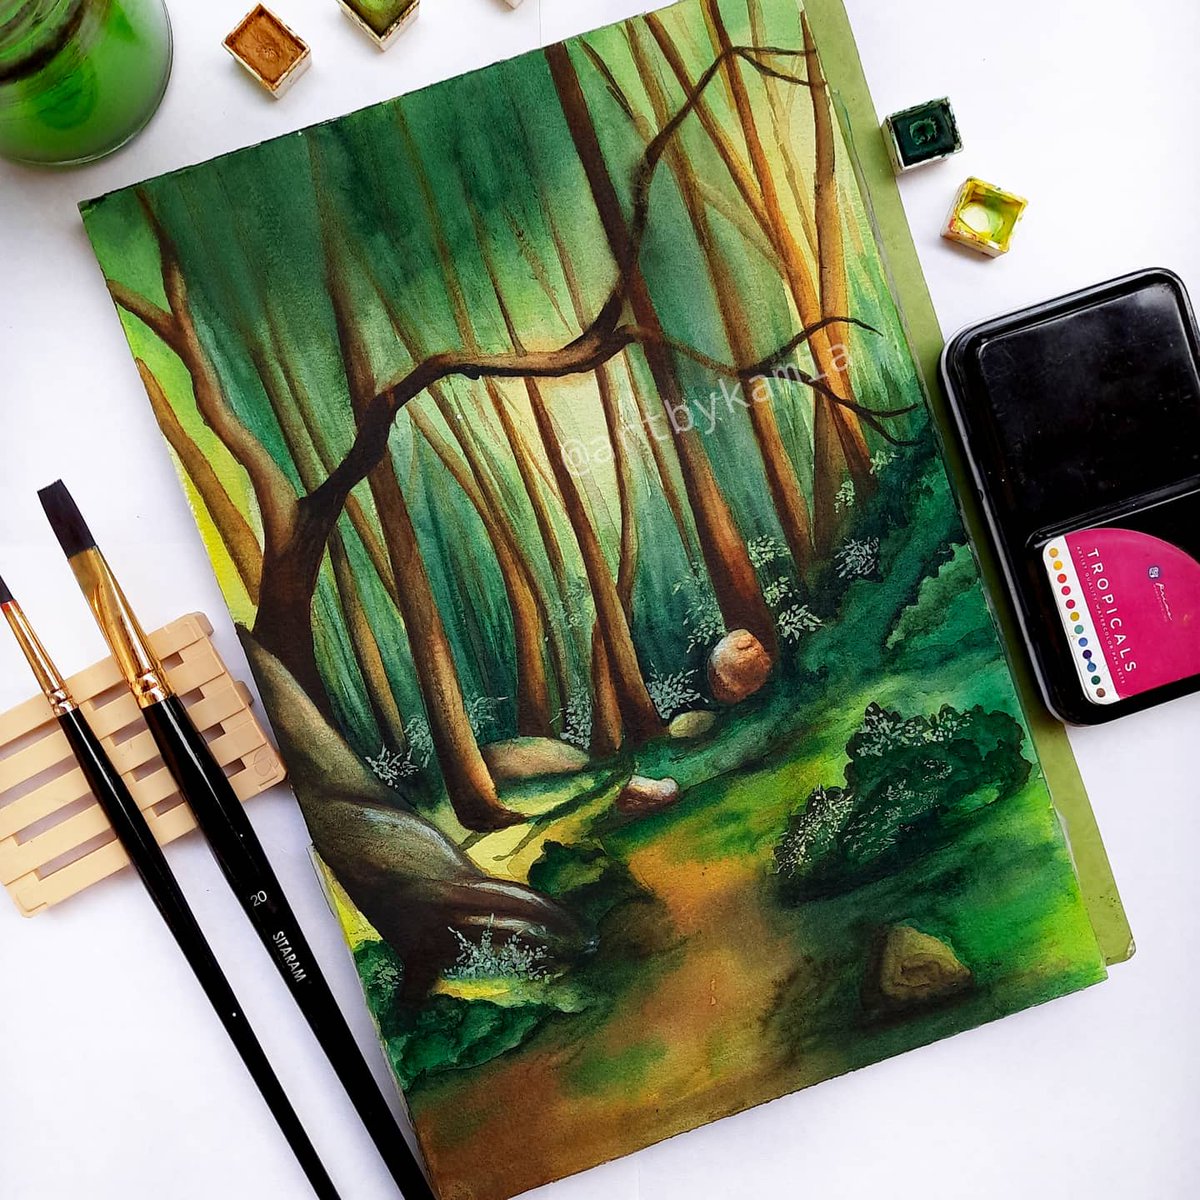 My watercolor landscape after ages!!!

#ourmythicalforest #magicalforest #watercolourlandscape #watercolourlandscapes #magicallandscape #majesticlandscapes #artbykamia #theuncommonbox 
#baohongpaper #baohong_india #artphilosophy #artphilosophyco #artphilosophydt